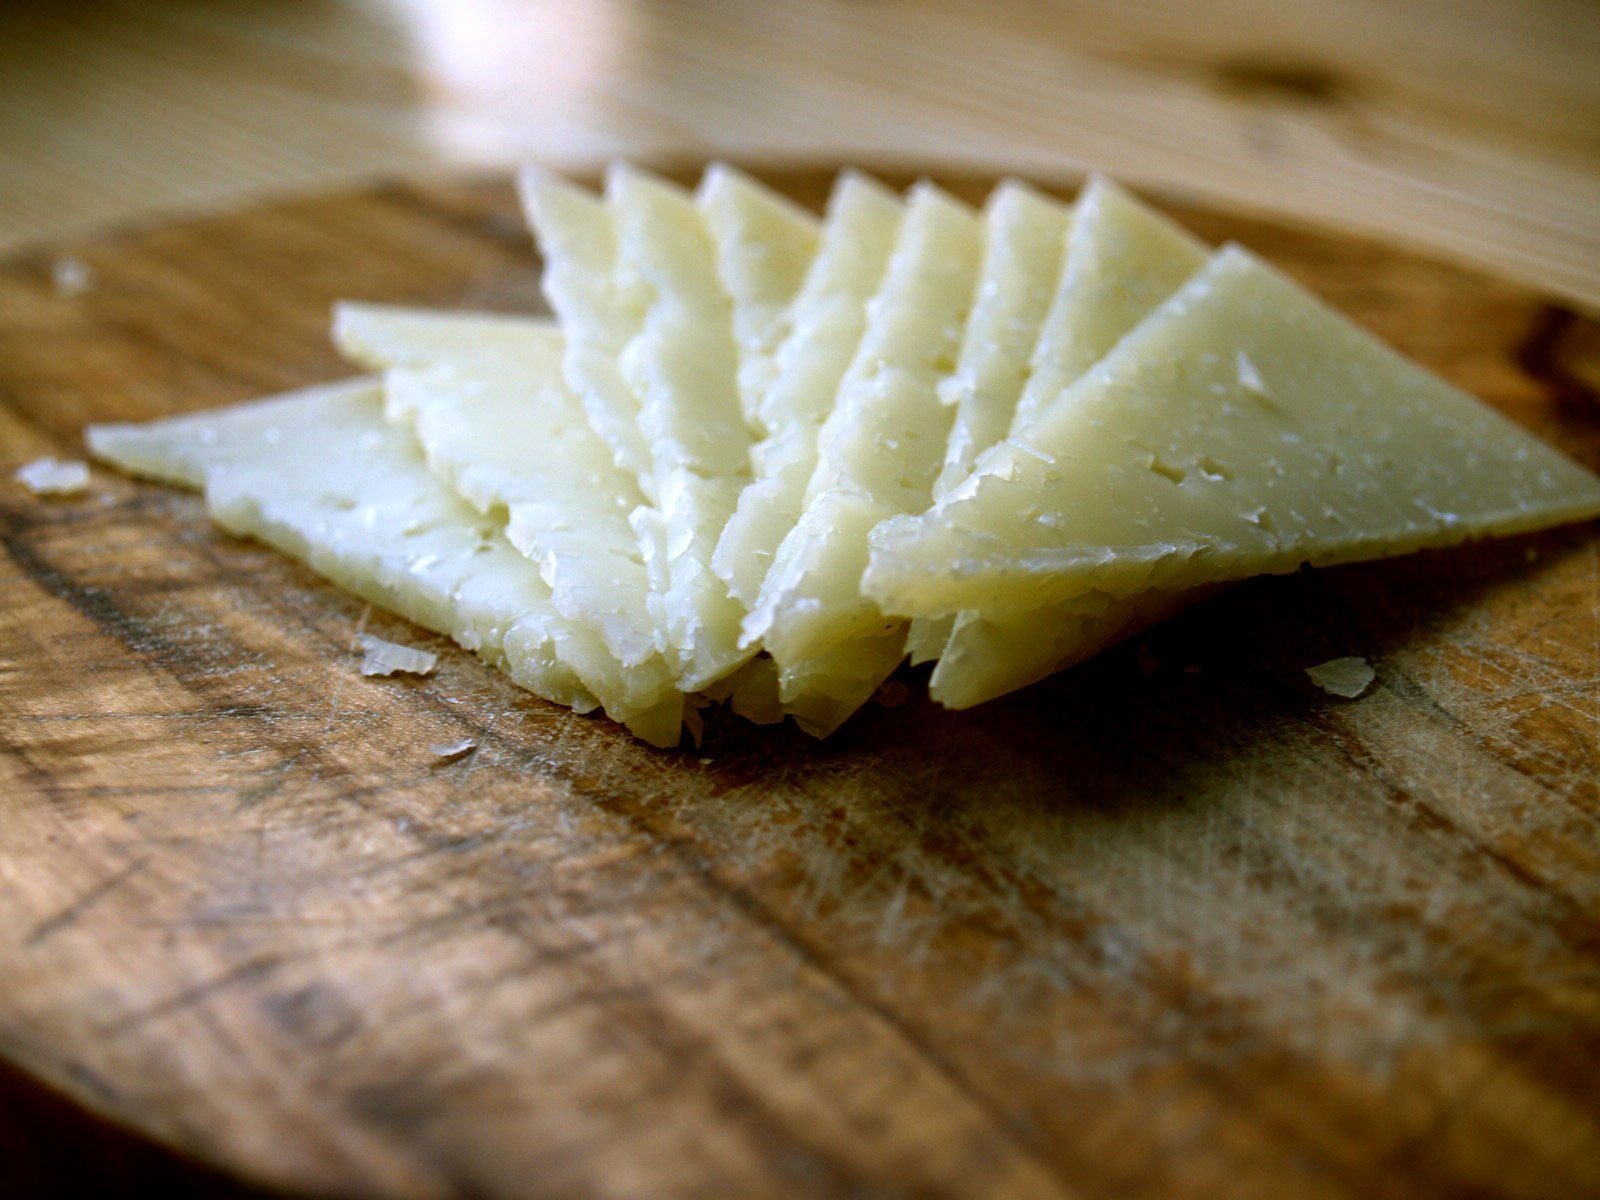 A few slices of manchego cheese sits on a rustic wooden chopping board